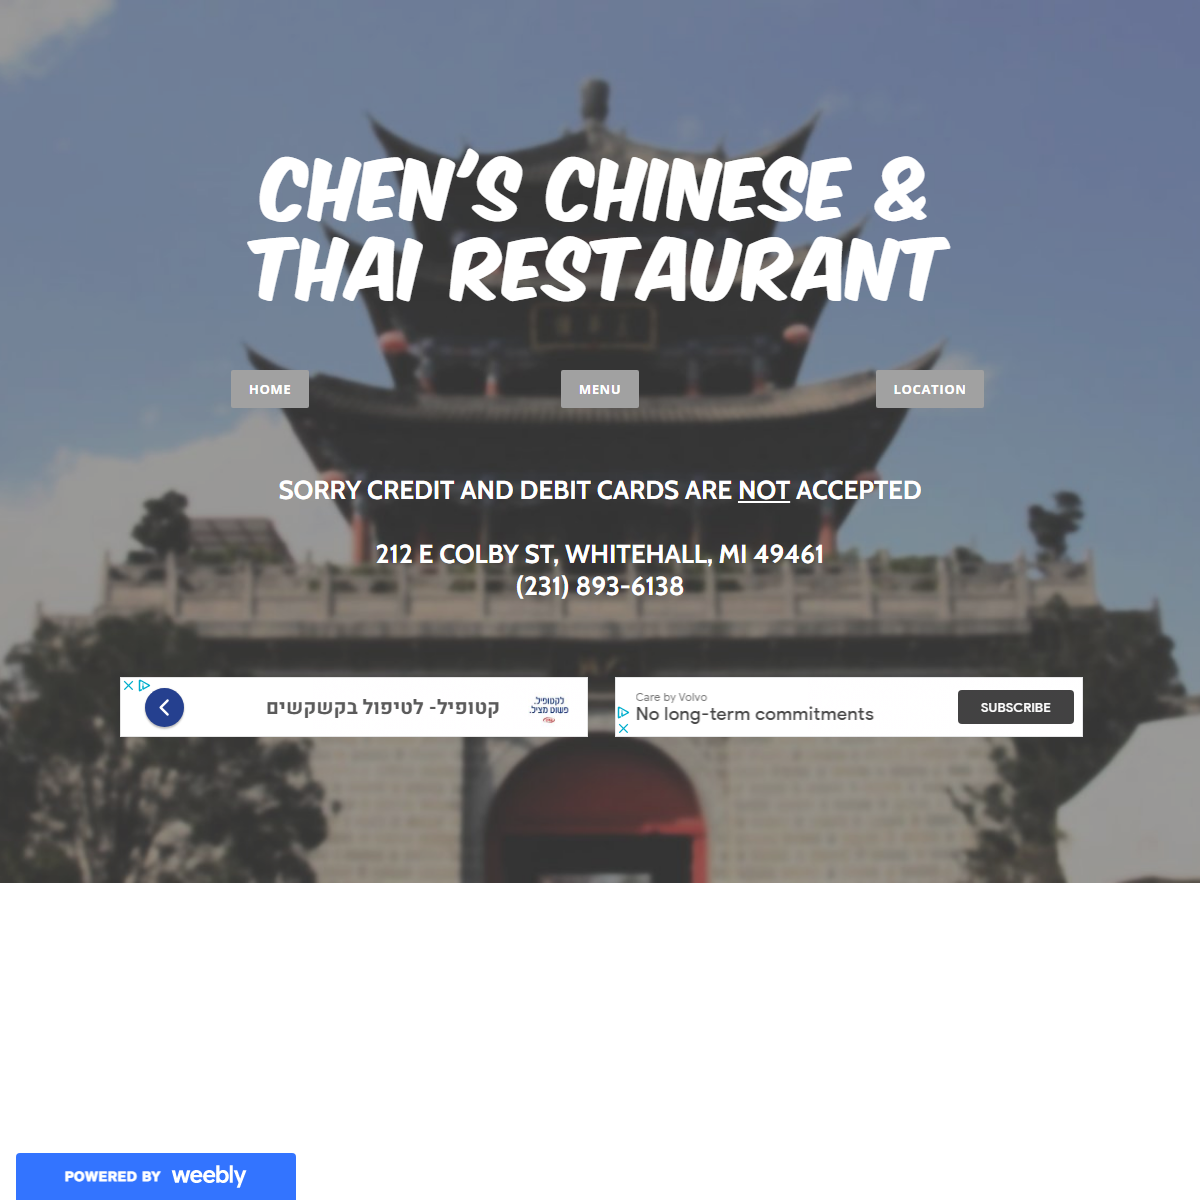 A complete backup of http://chenschinese.weebly.com/